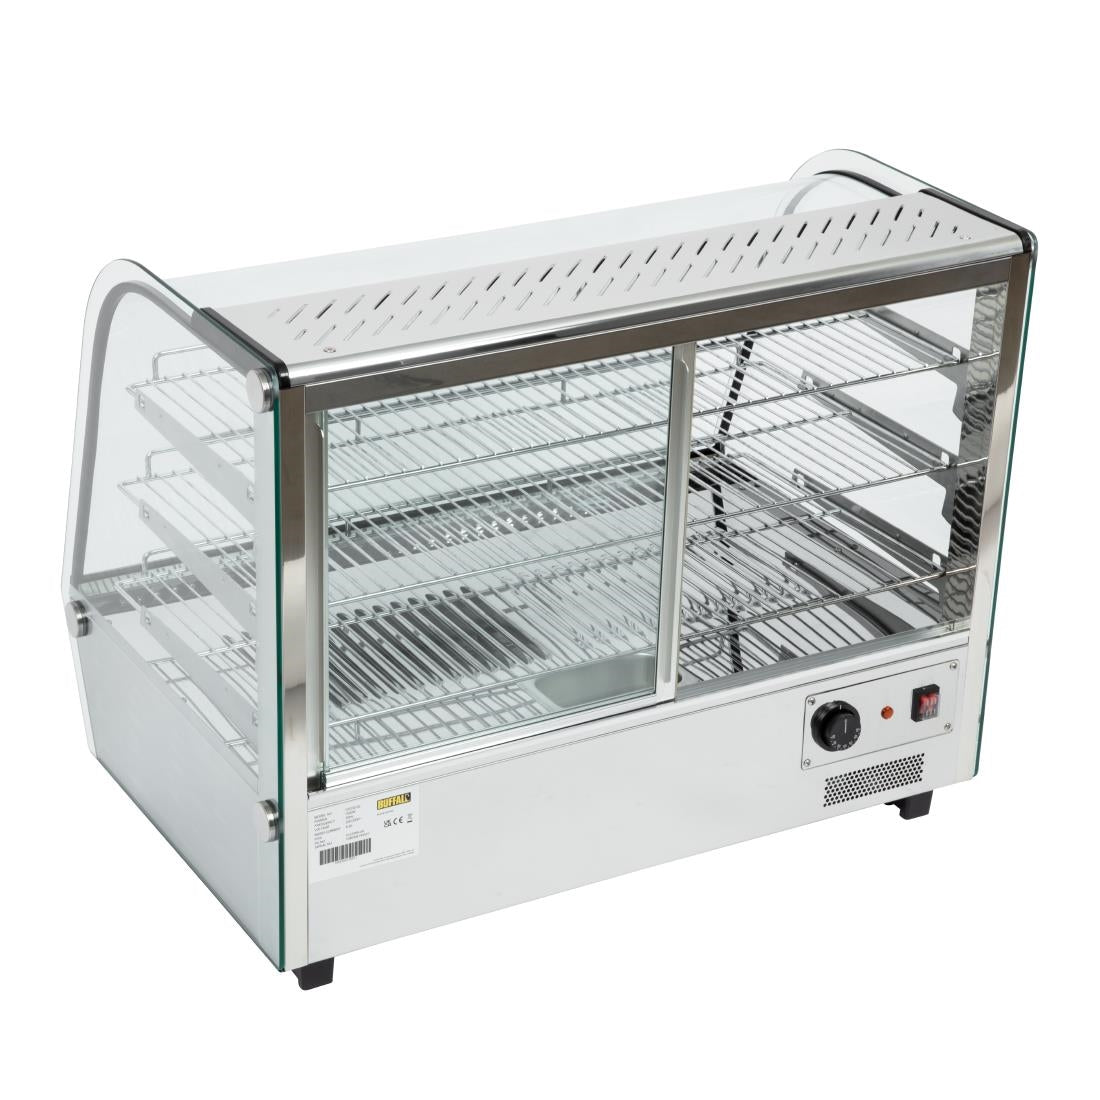 Buffalo Countertop Heated Food Display 868mm JD Catering Equipment Solutions Ltd